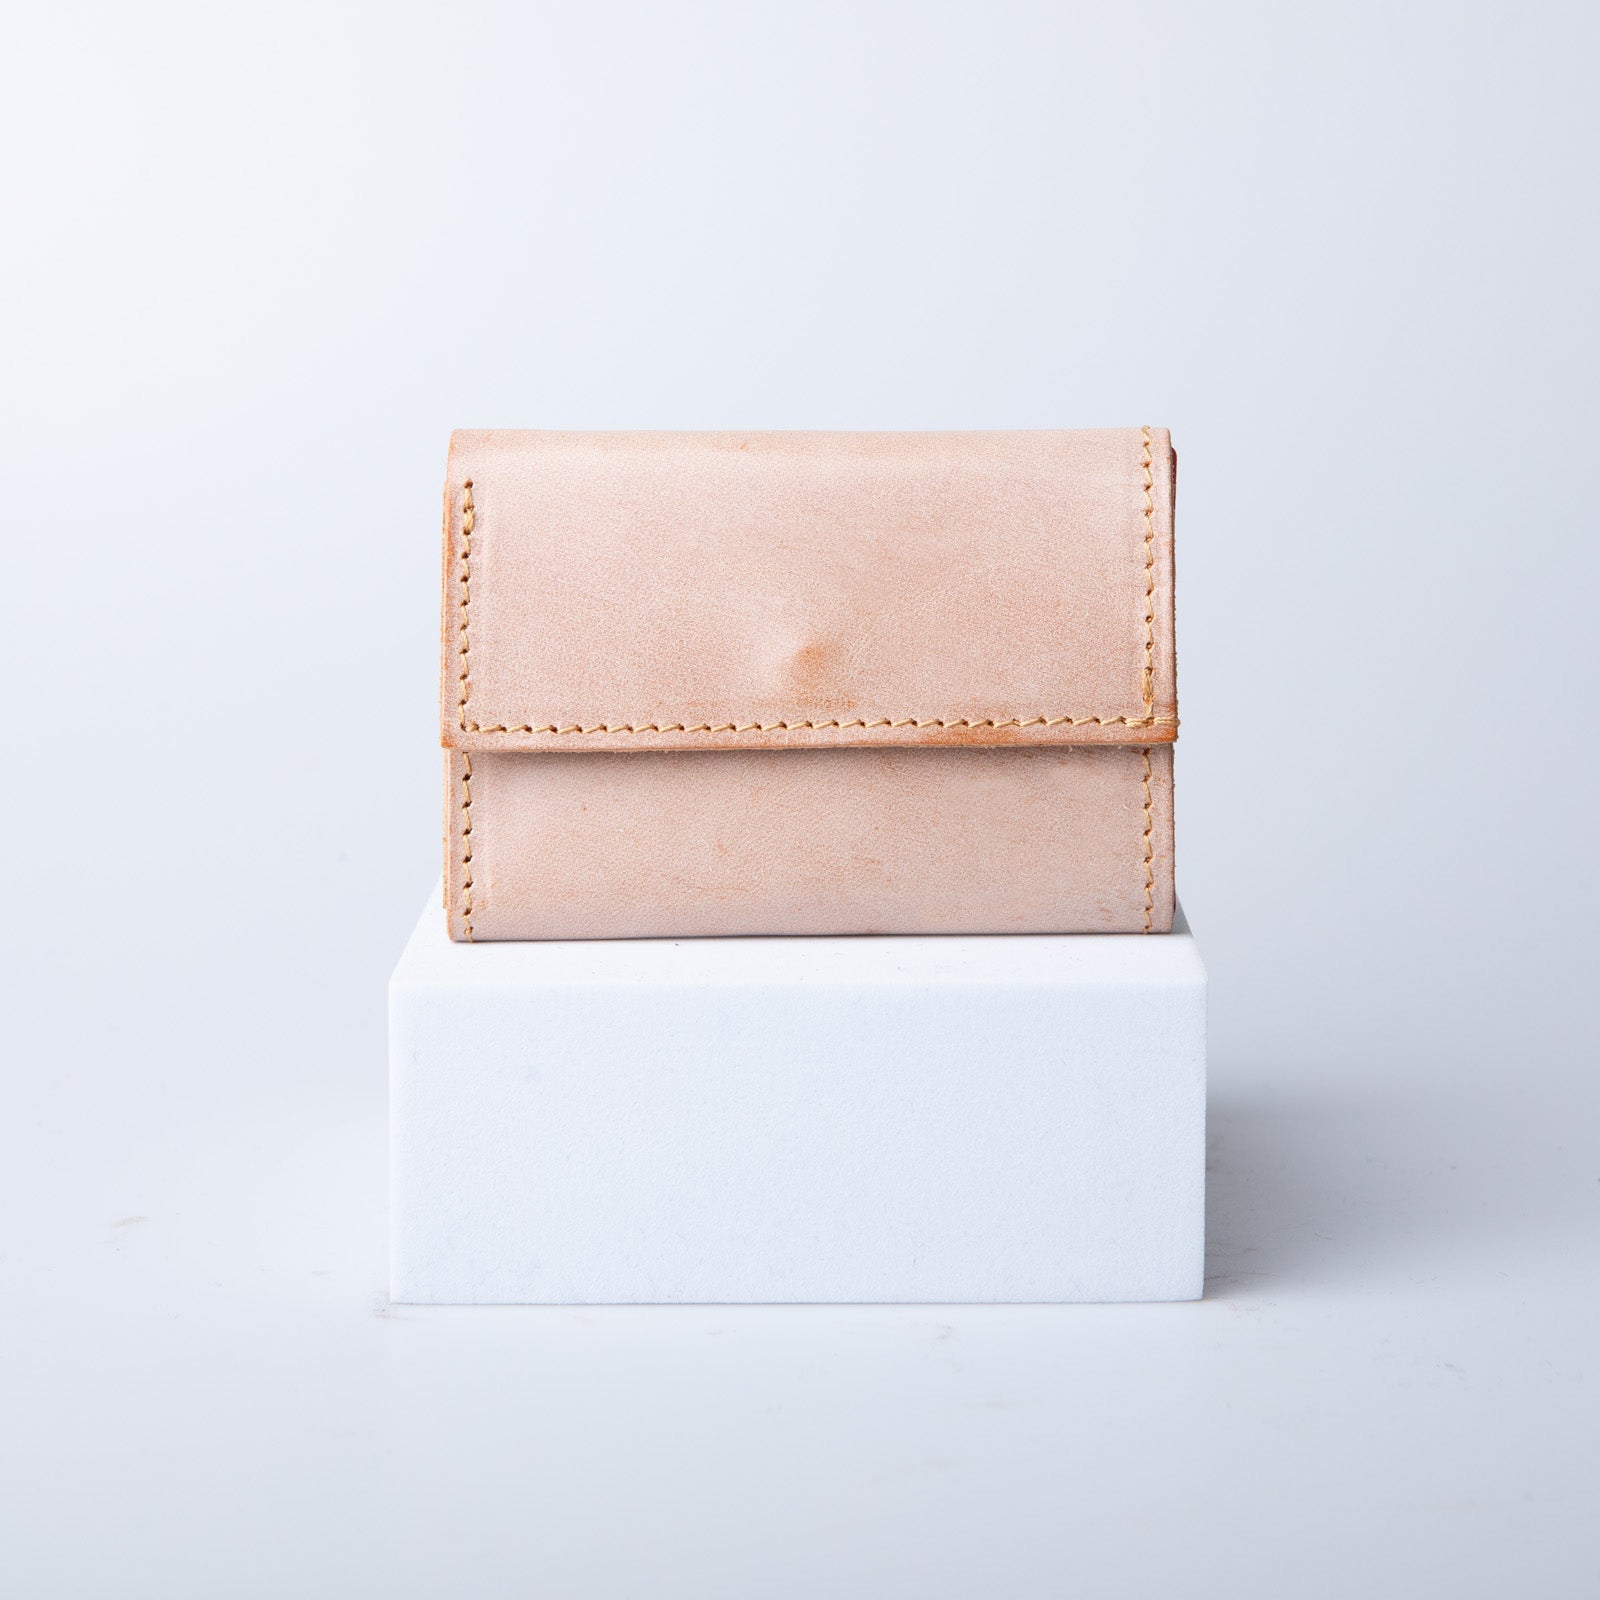 White wax Tochigi Leather trifold wallet JAPAN FACTORY MANO